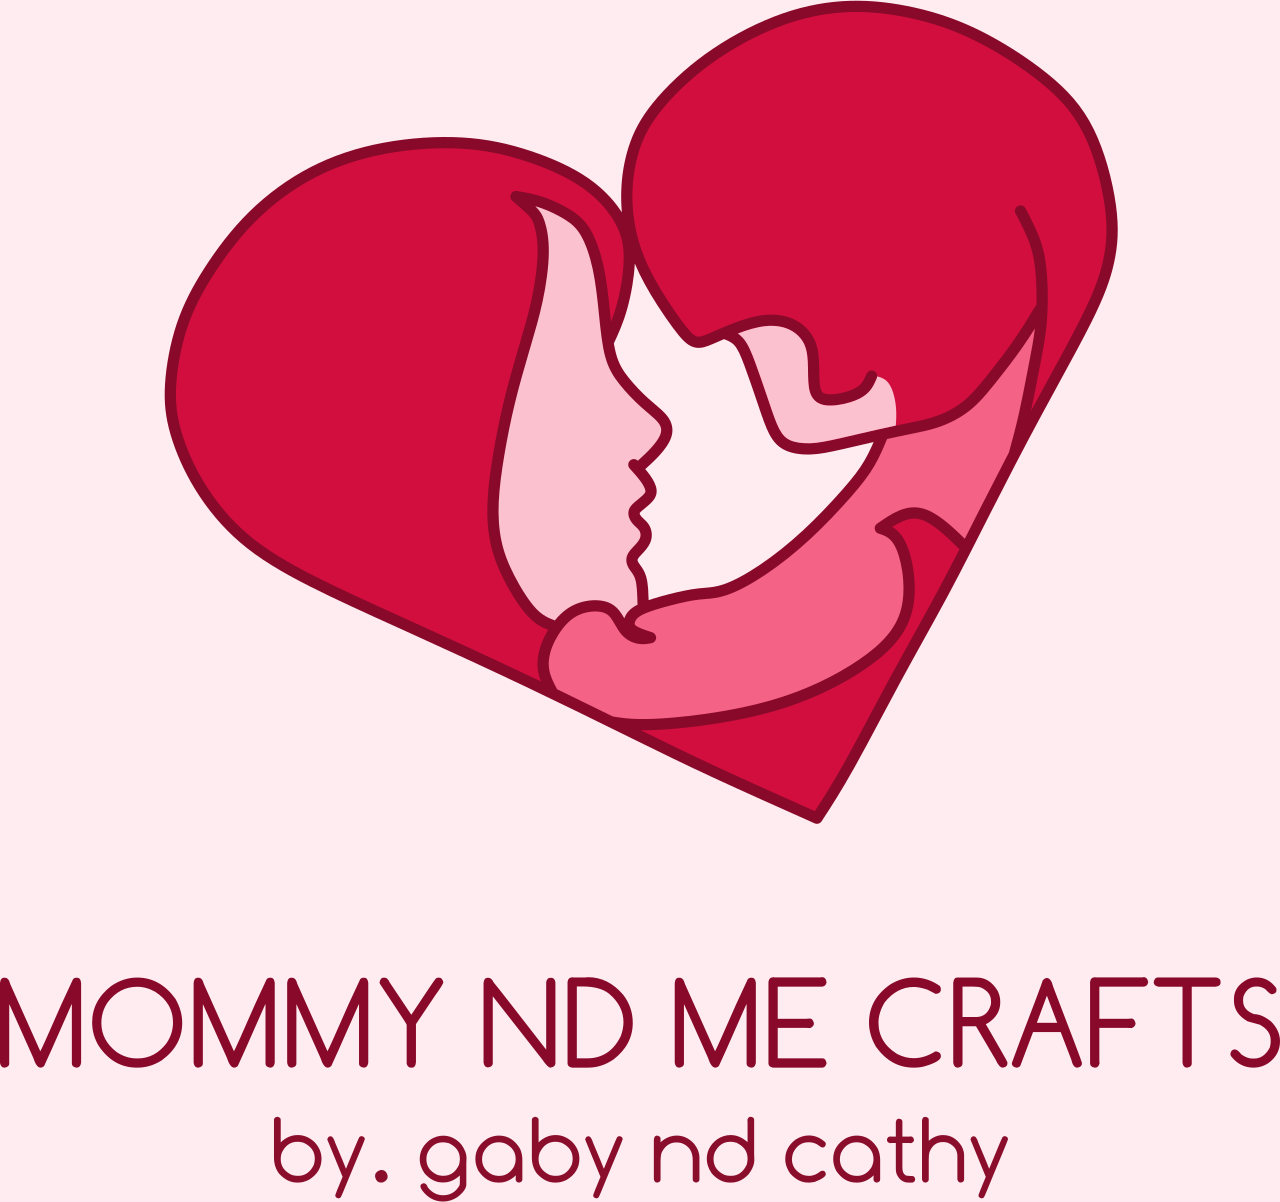 MOMMY ND ME CRAFTS's web page